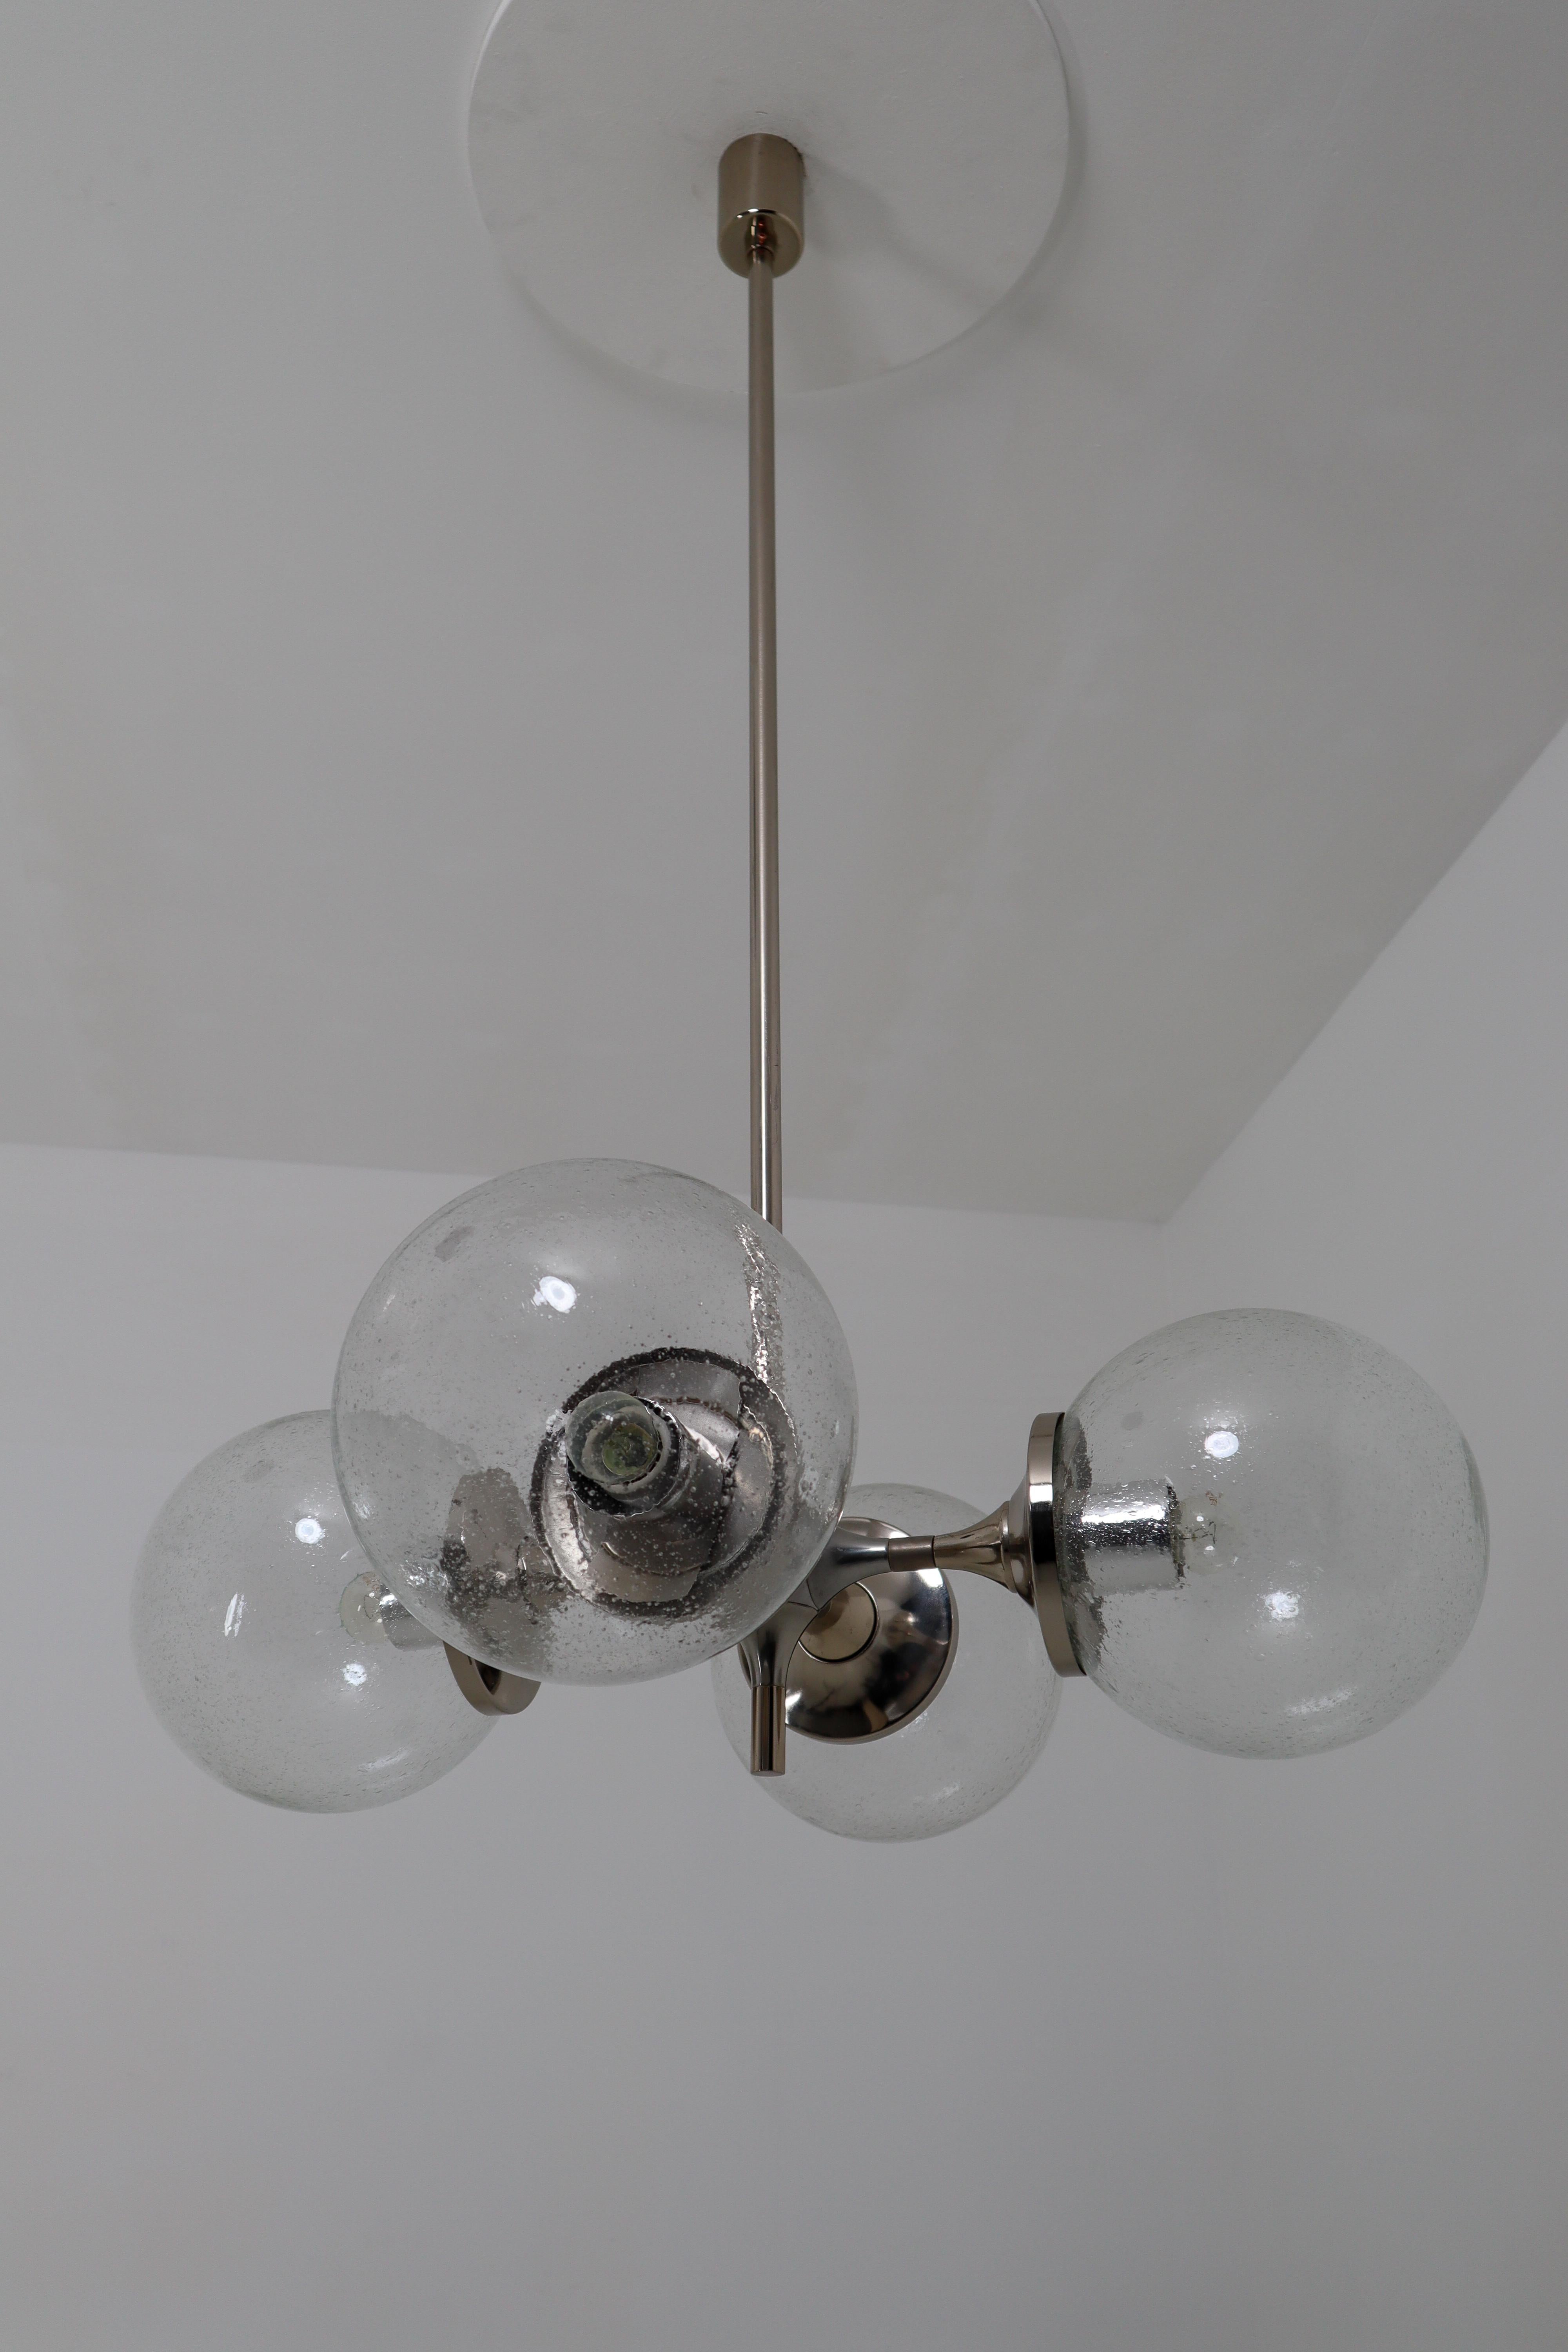 Big modern German chandeliers in nickel-plated steel with beautiful hand blown raindrop glass. Due to the symmetry of the chandelier the light is nicely divided and creates a beautiful light pattern on the wall and sealing. Measures: Diameter 80 cm.